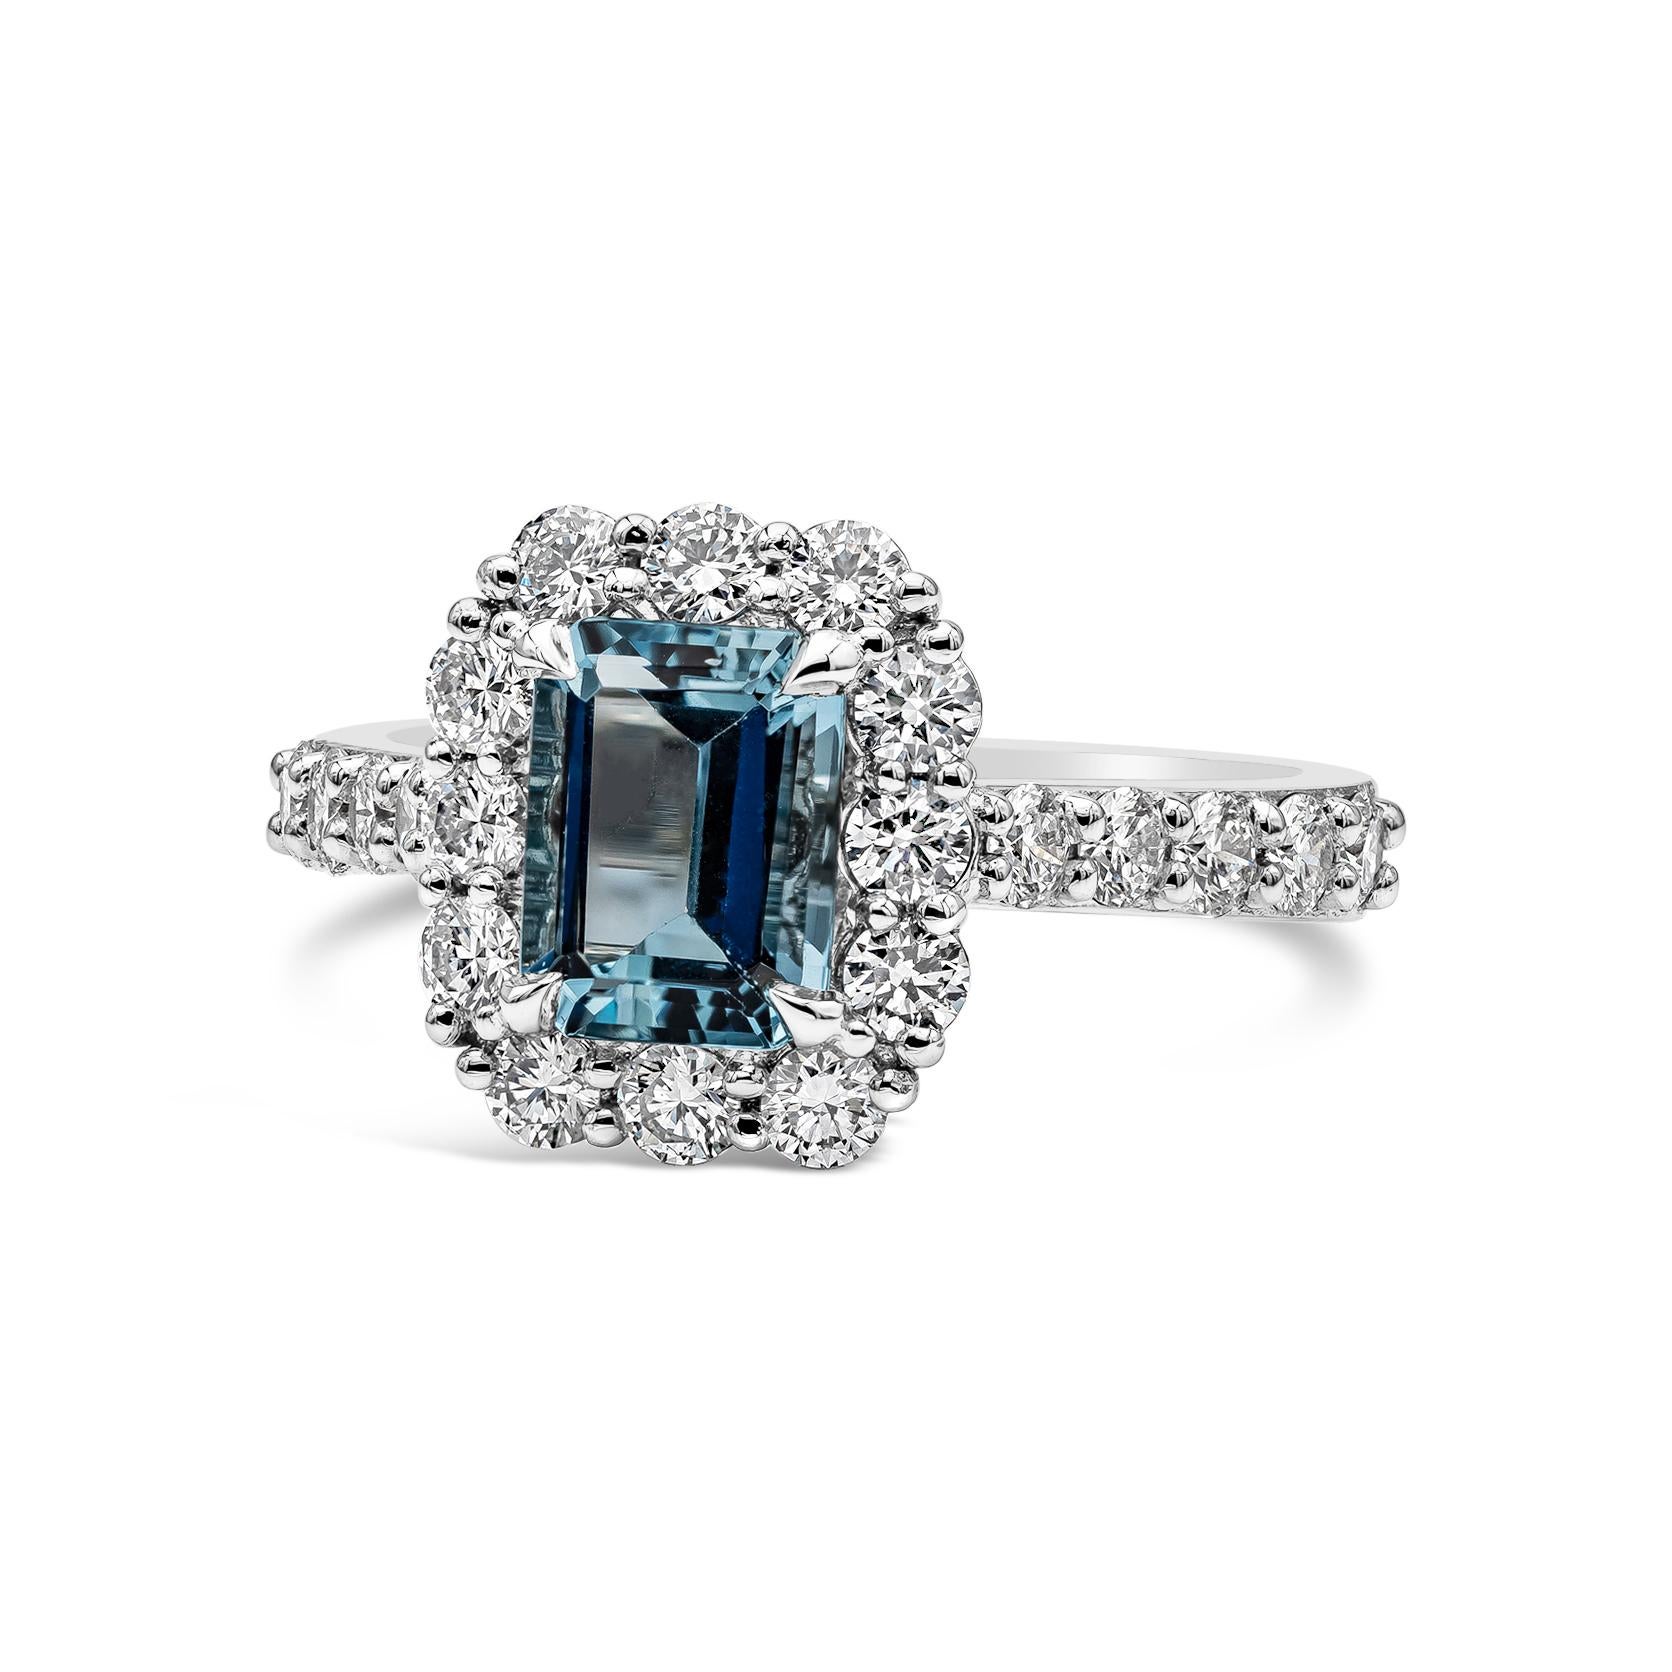 A timeless engagement ring style showcasing a 1.39 carat emerald cut aquamarine, surrounded by a row of round brilliant diamonds set in platinum. Accent diamonds weigh 1.12 carats total and are approximately F color, VS clarity.

Style available in